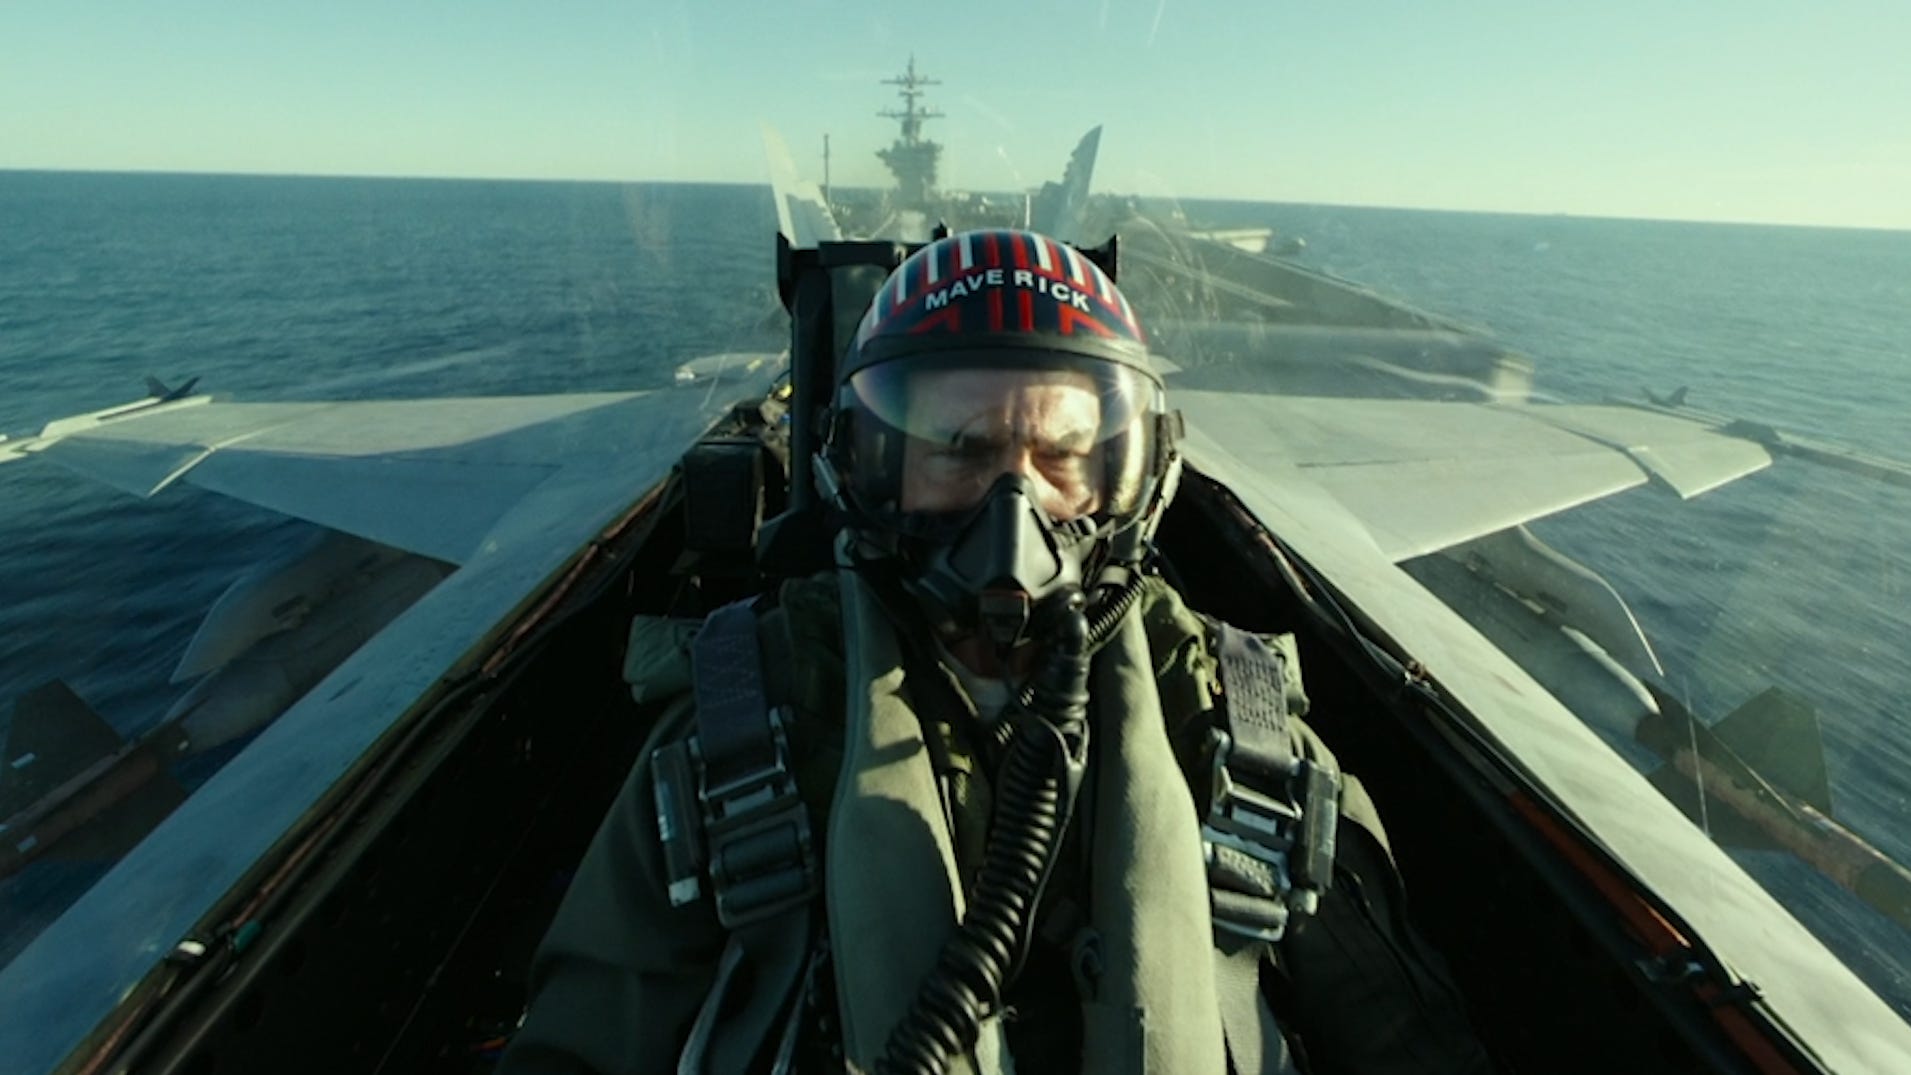 Proof Tom Cruise Really Flew His Own Fighter Jet In 'Top Gun 2'